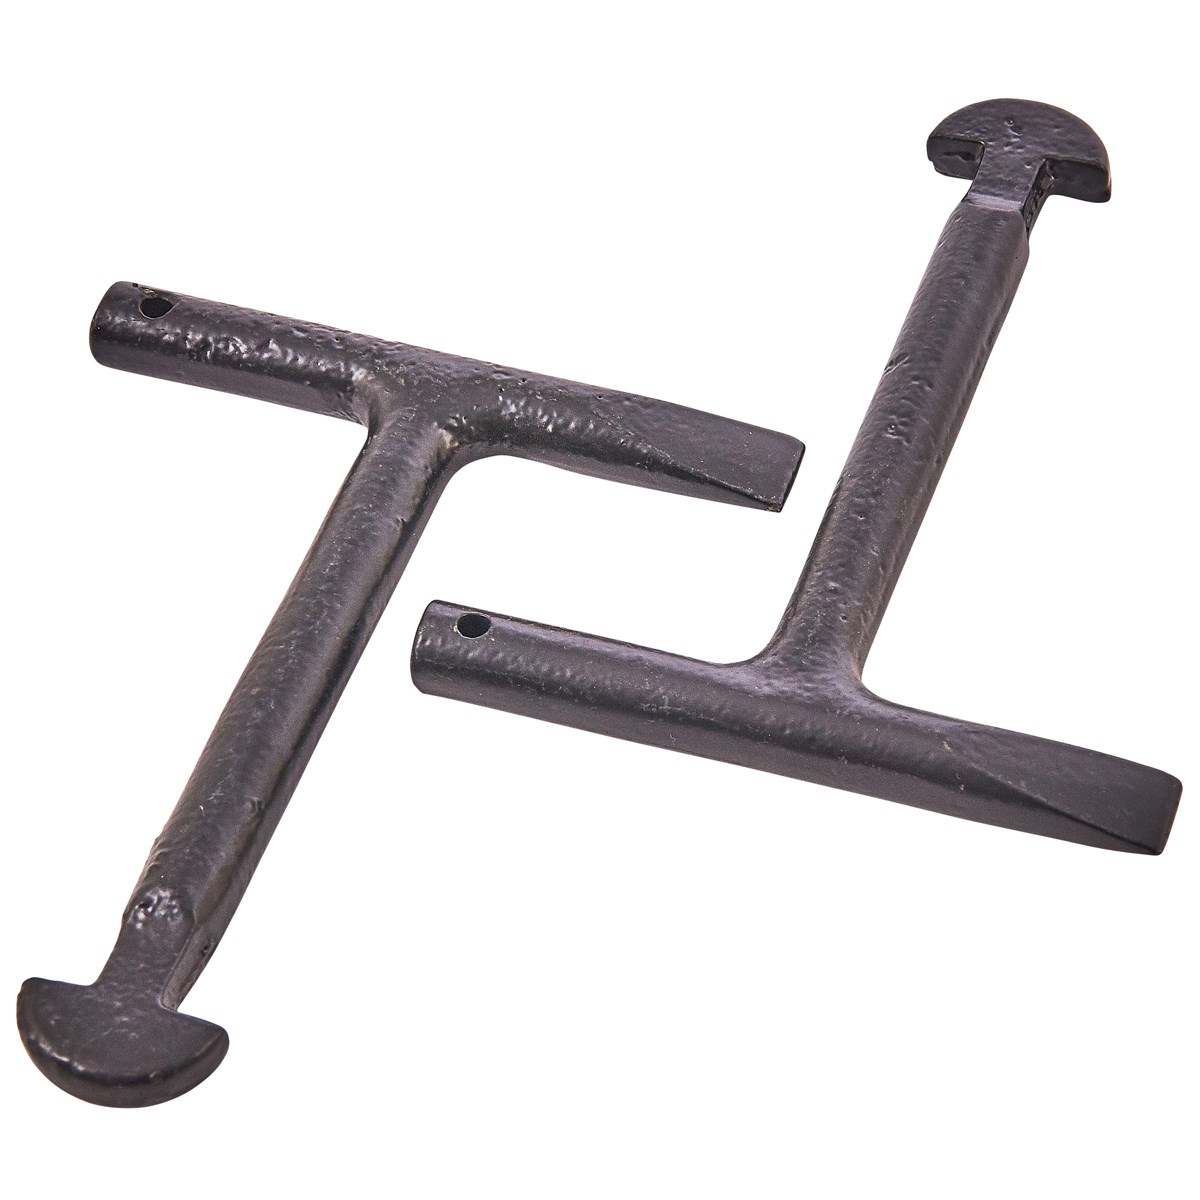 UNIVERSAL MANHOLE KEY 450mm T-Handle Strong Carbon Steel Plumbing Cover Lifter 